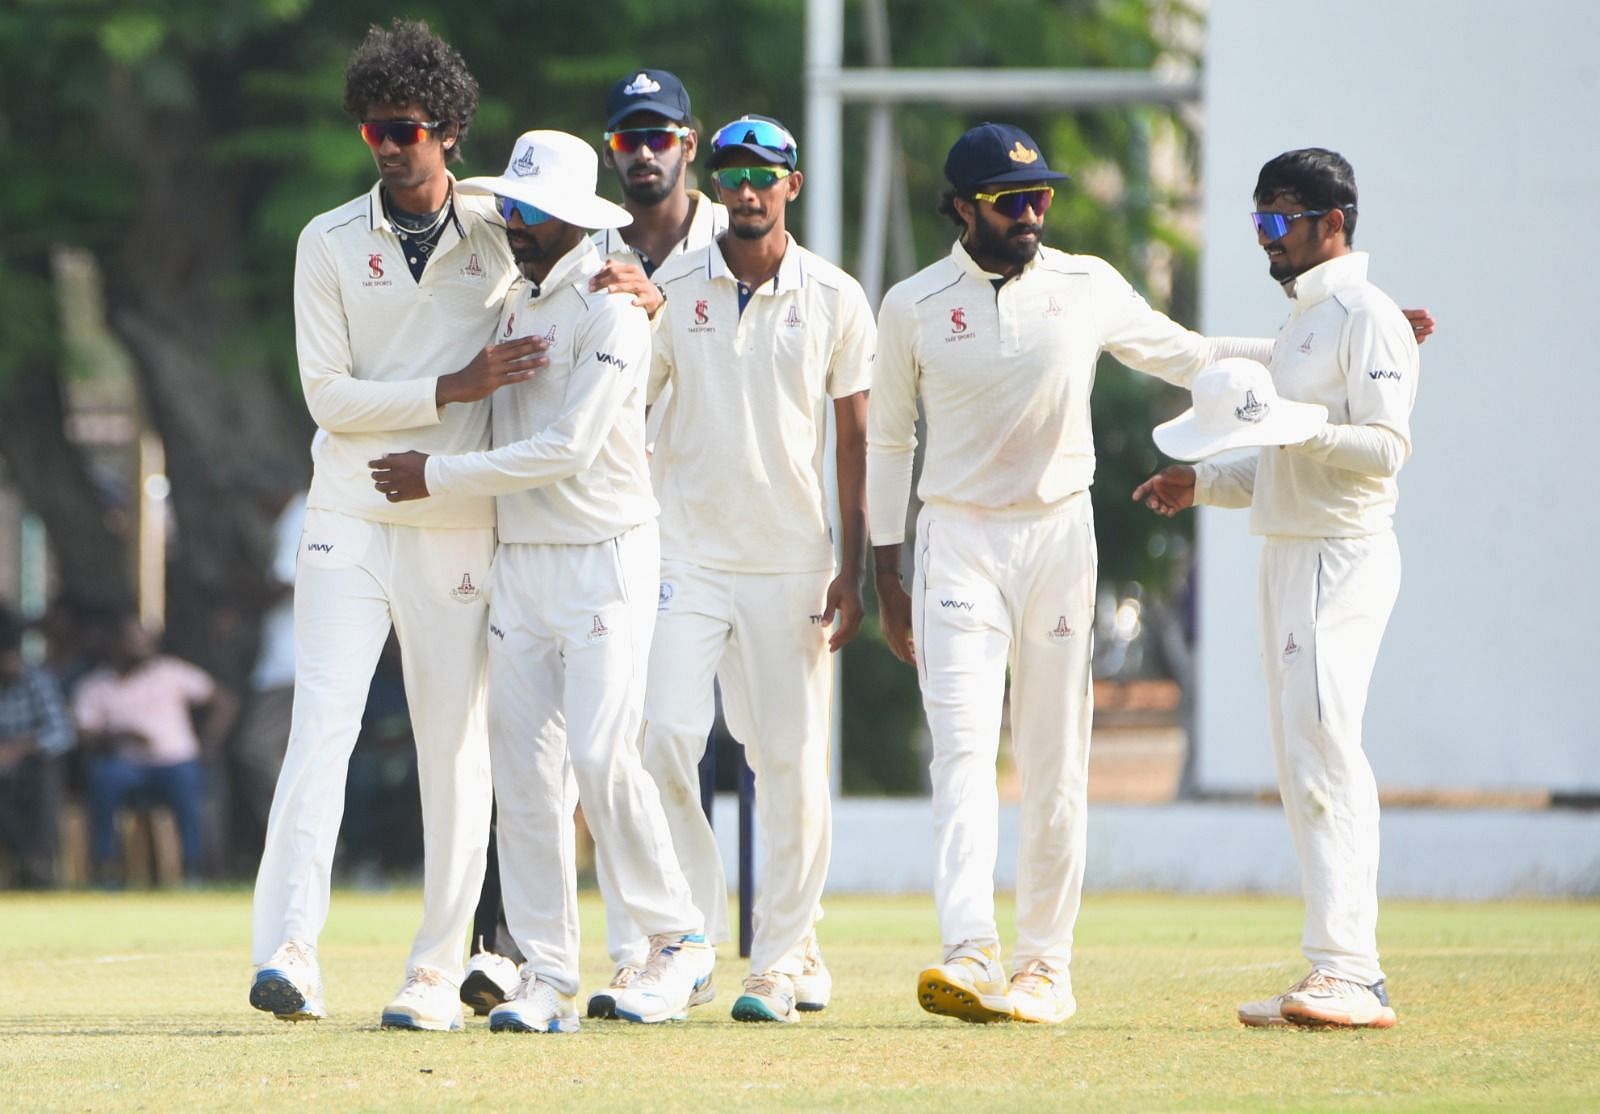 Tamil Nadu have qualified for the semifinal of the Ranji Trophy for the first time since 2016-17/ [TNCA]